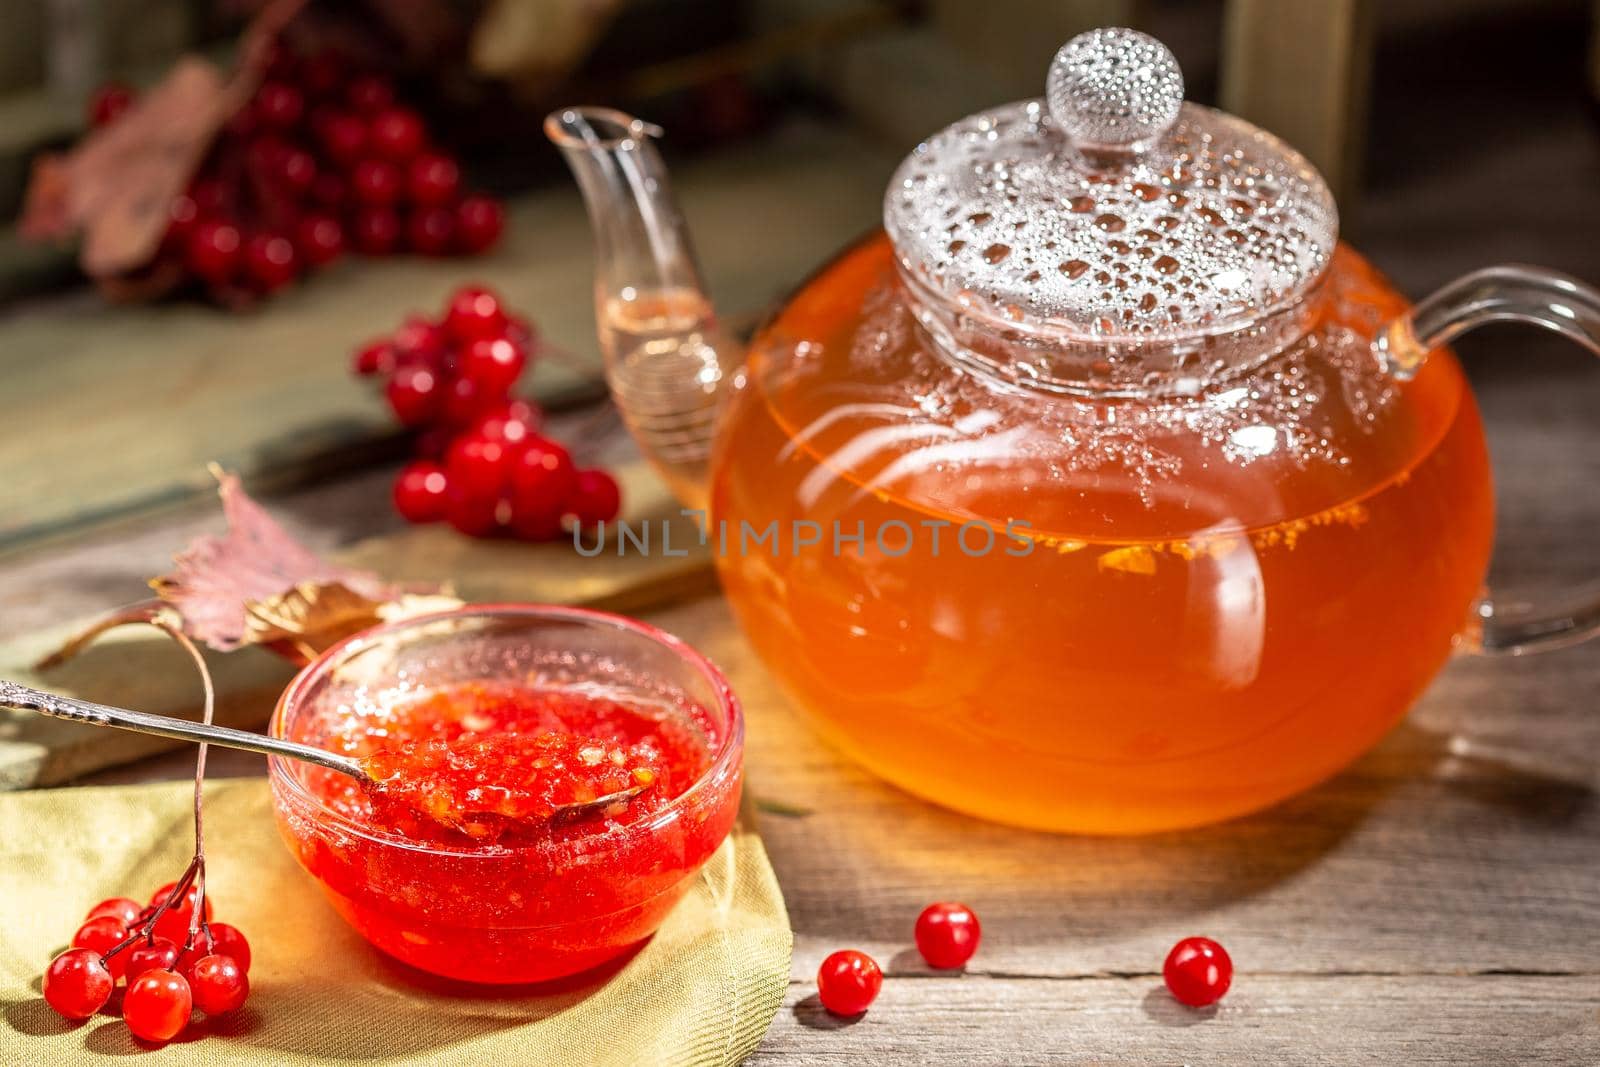 Viburnum jam in a glass bowl on the wooden table by Syvanych